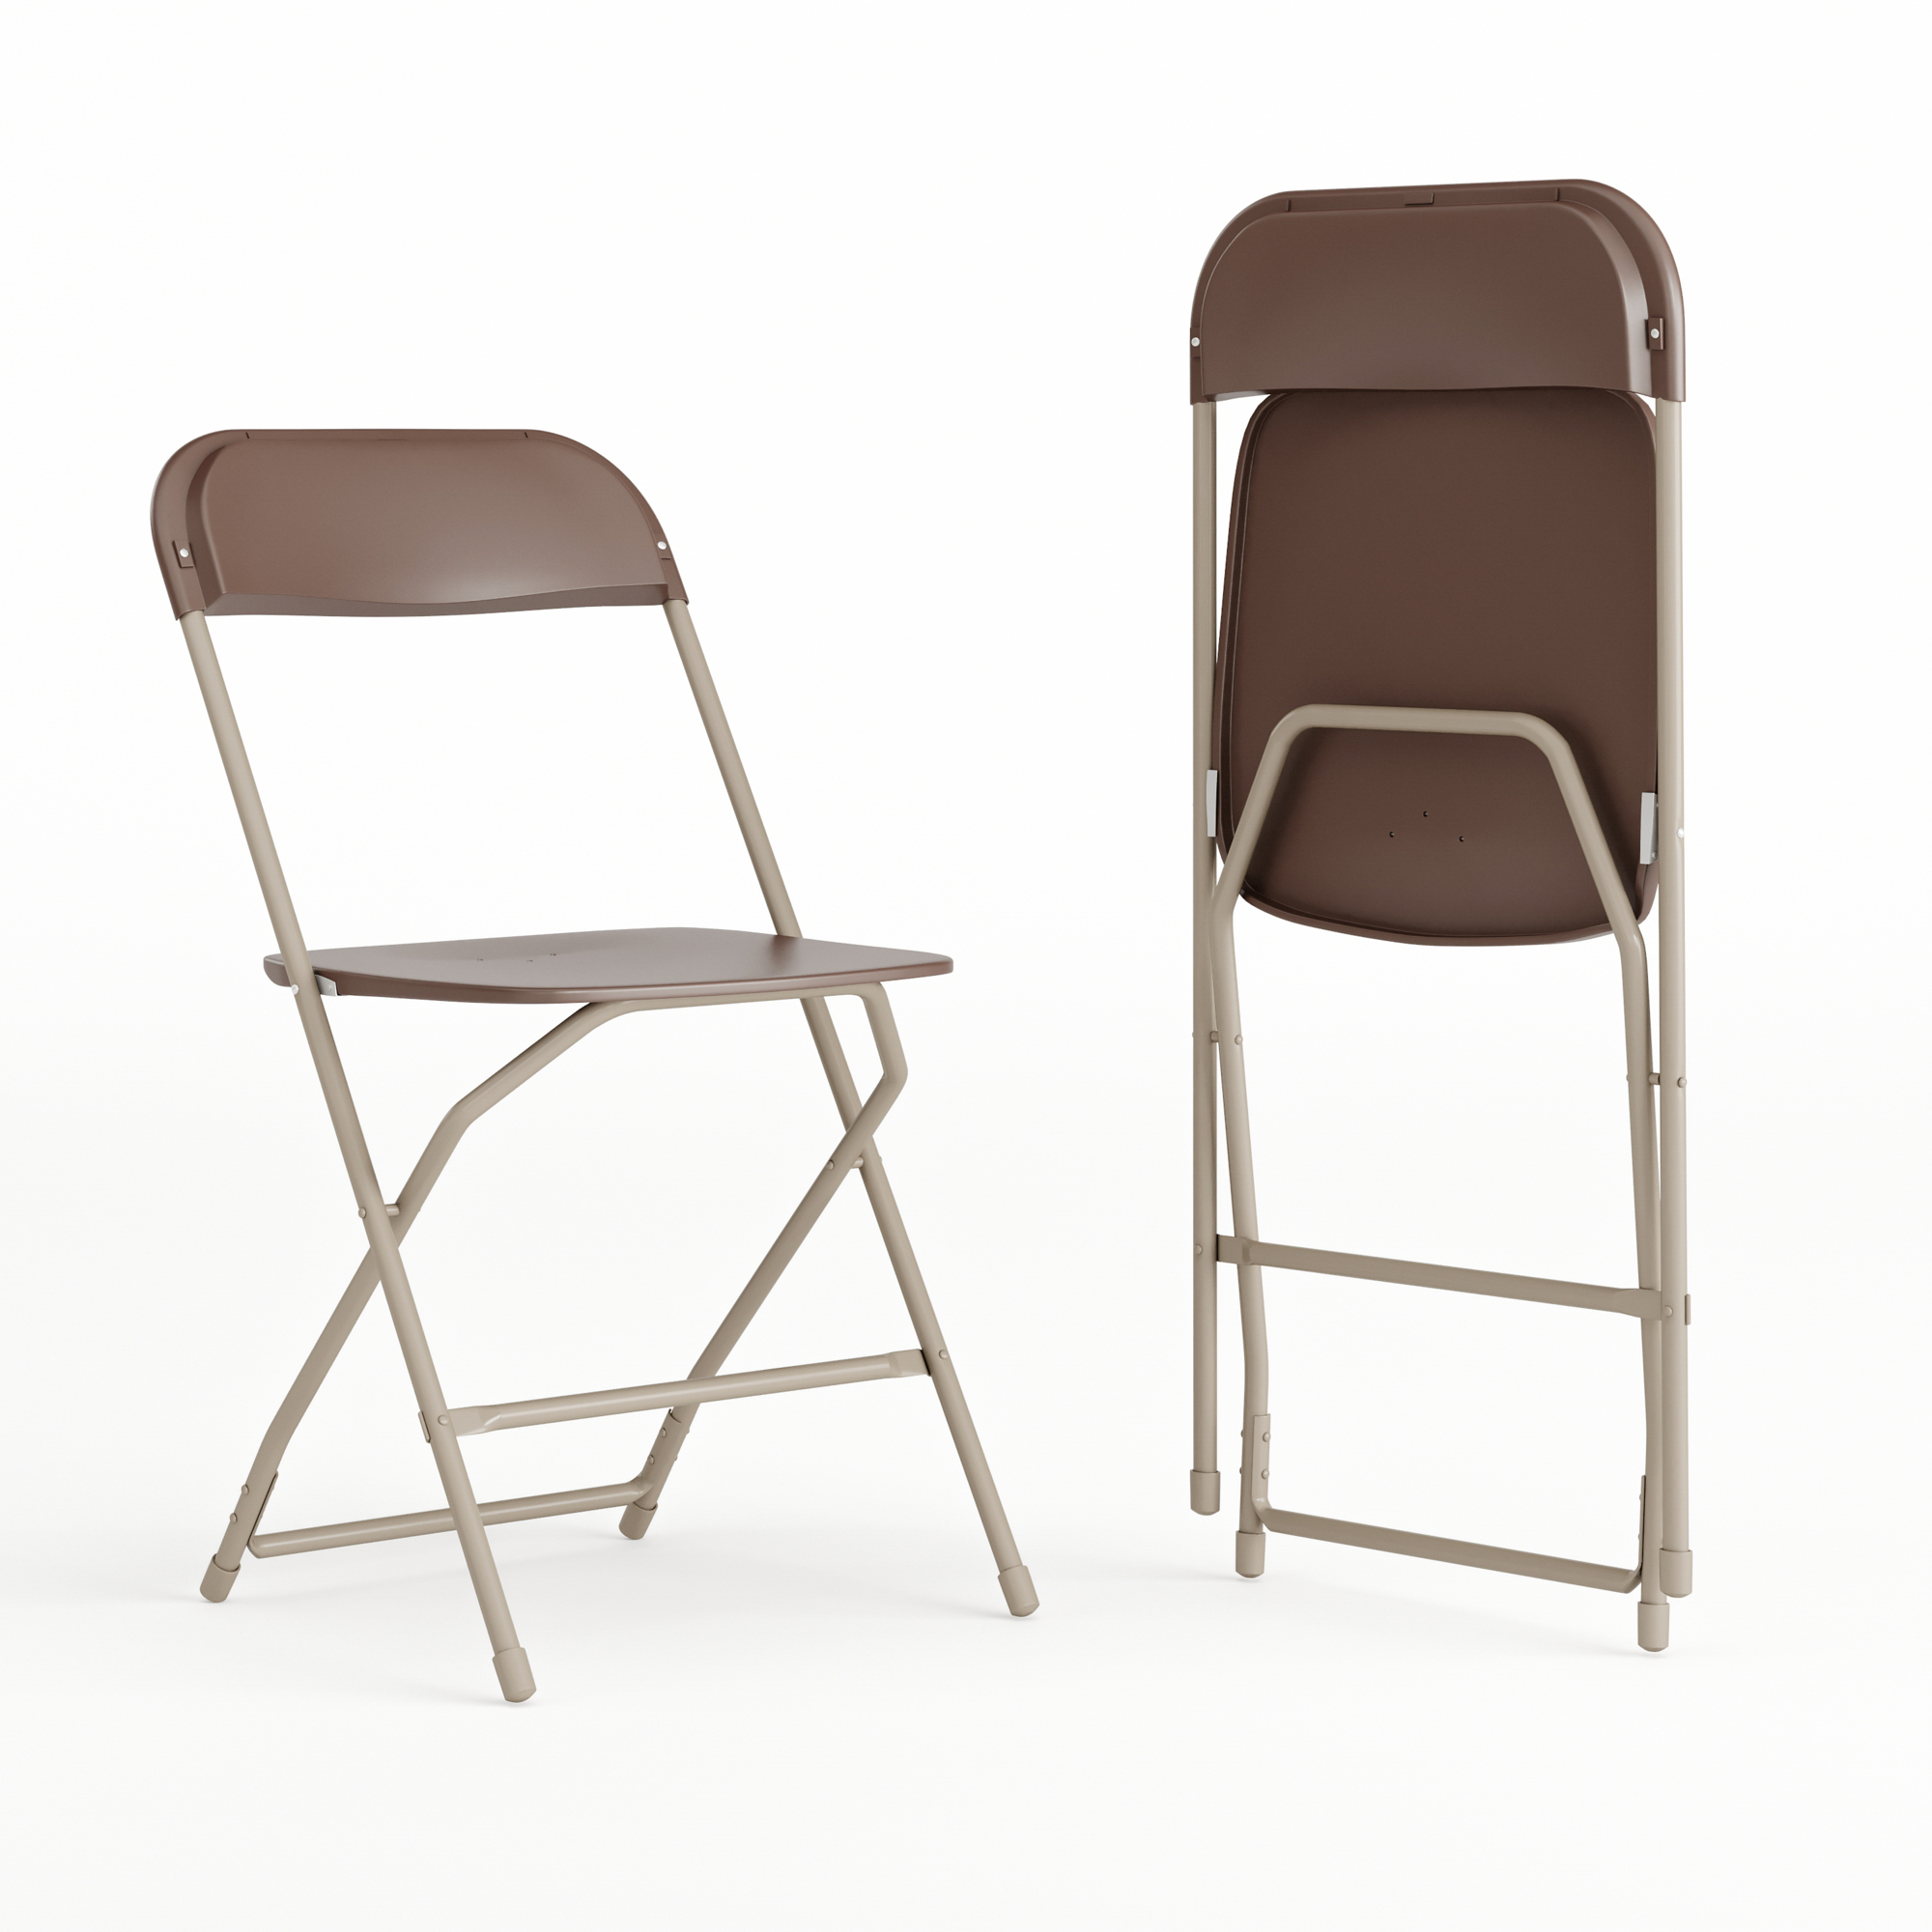 Flash Furniture, Folding Chair - Brown Plastic - 2 Pack, Primary Color Brown, Included (qty.) 2, Model 2LEL3BRN